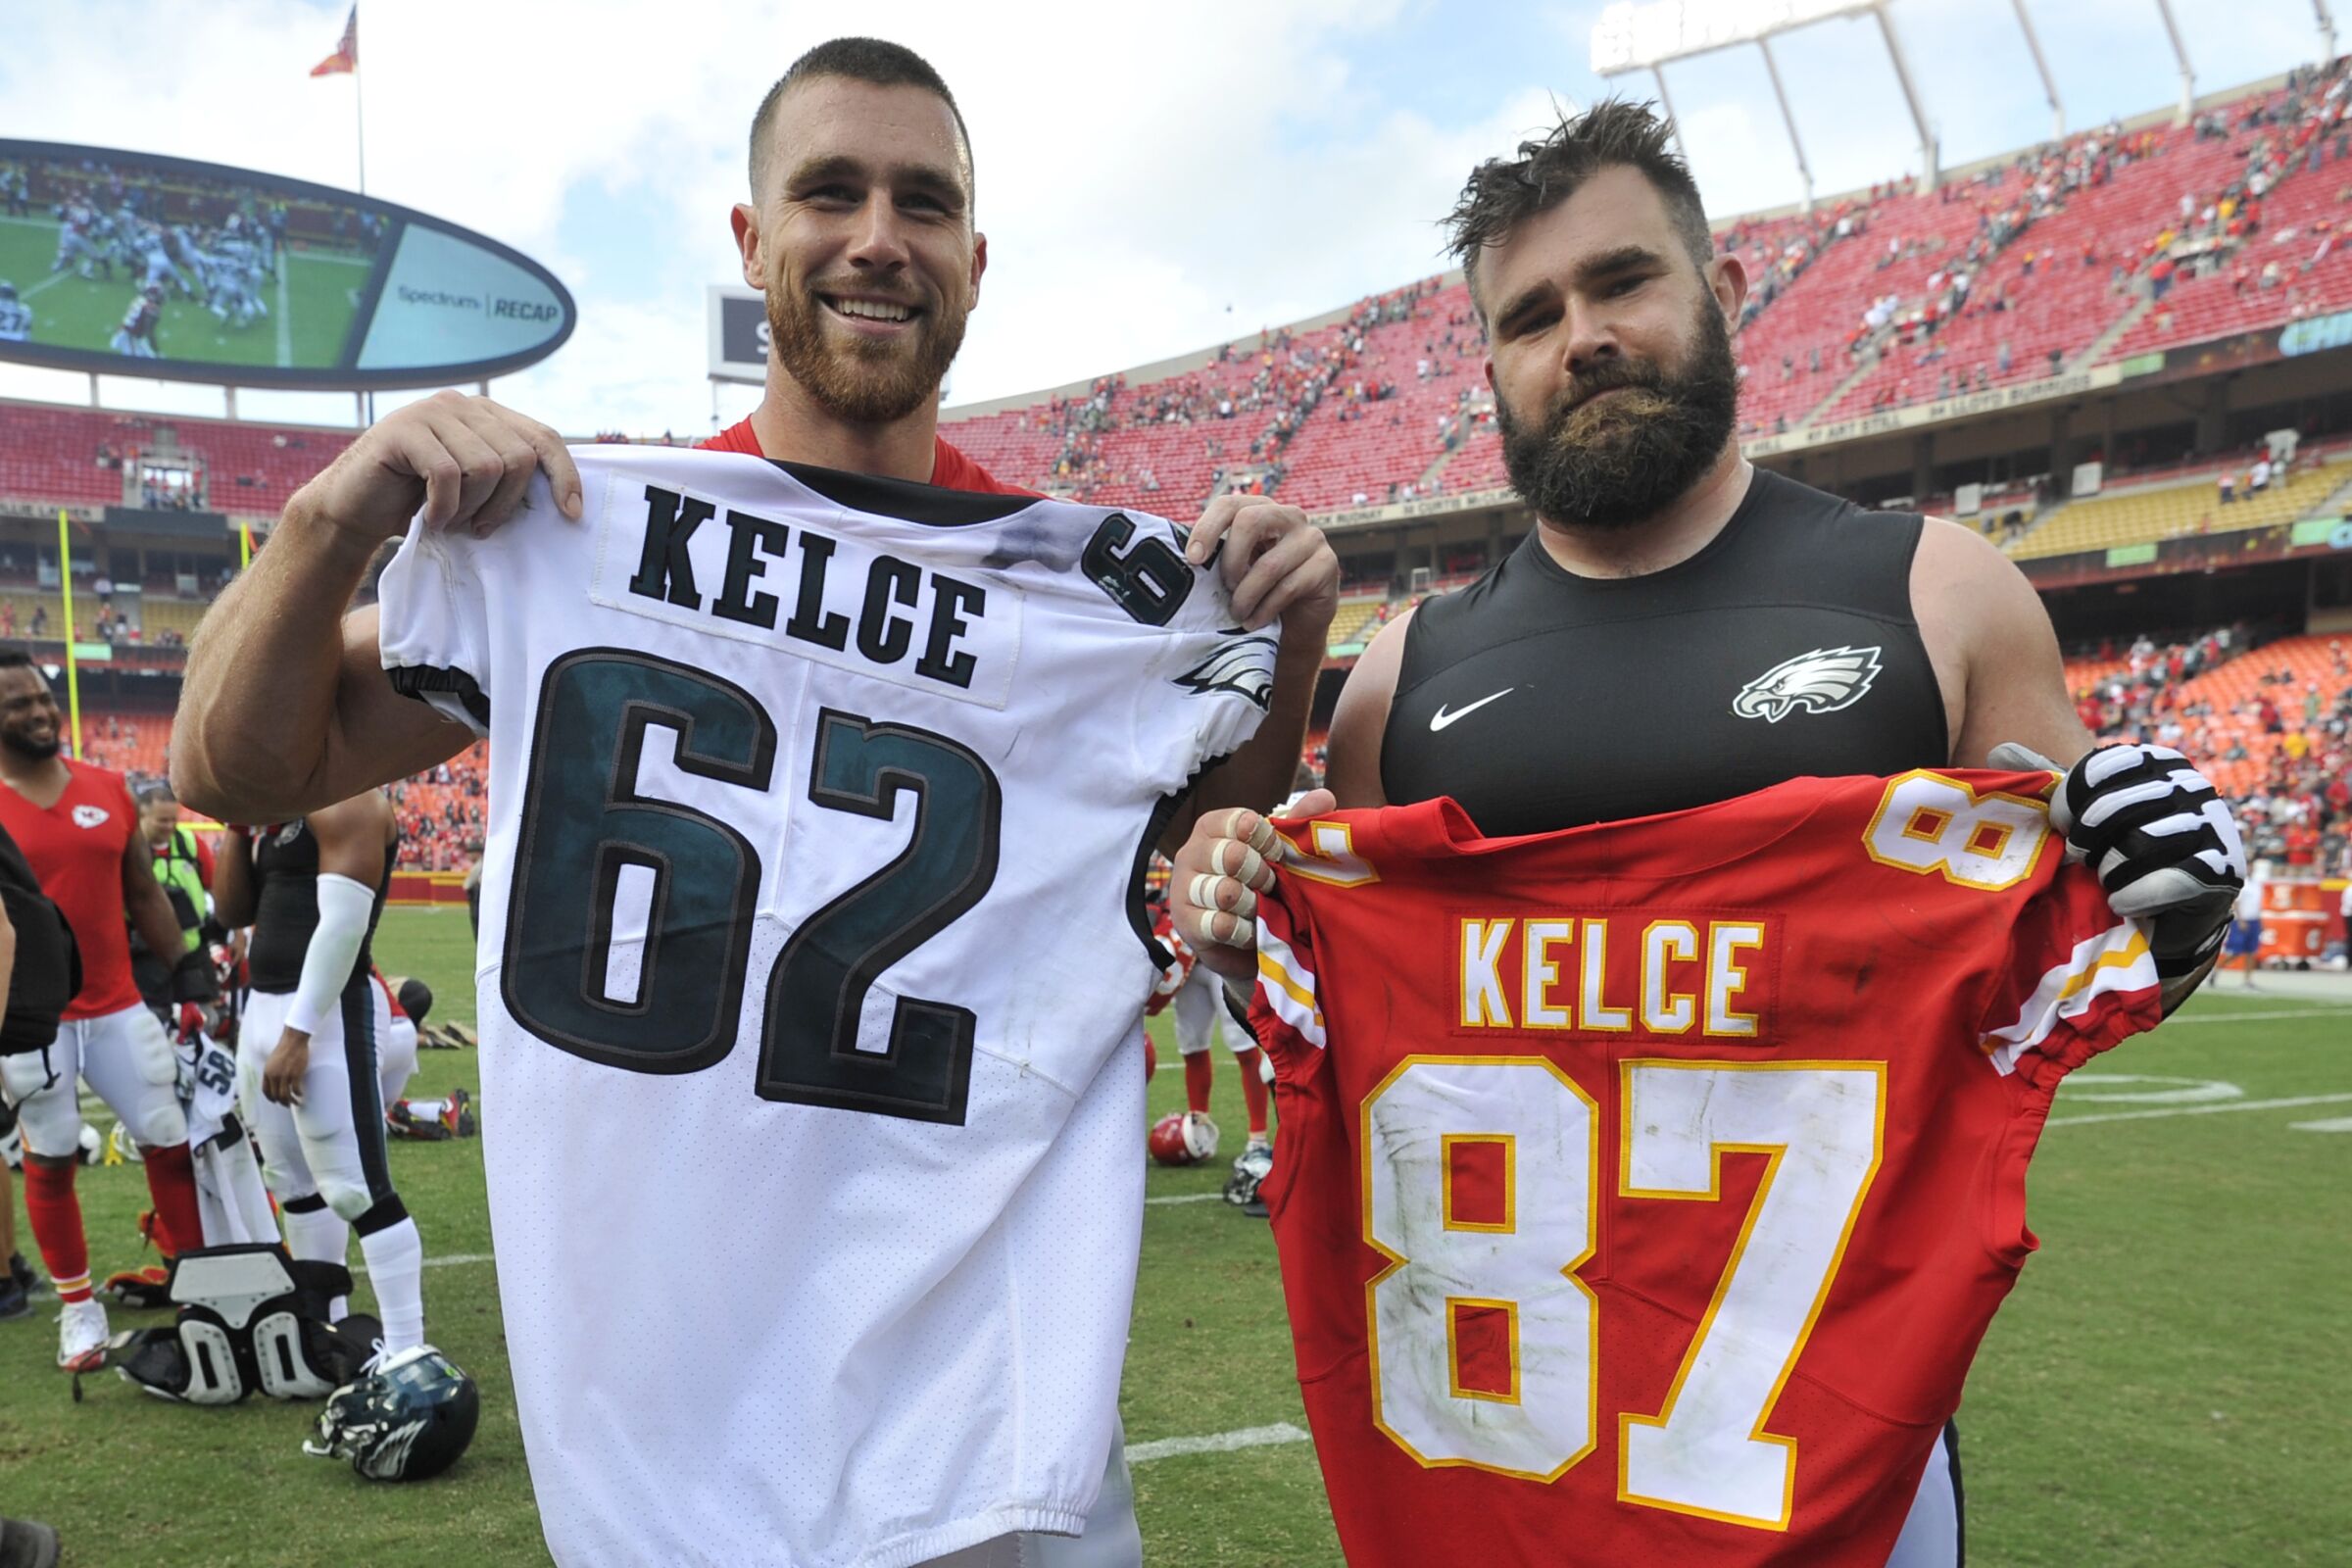 Chiefs tight end Travis Kelce, left, and his brother, Eagles center Jason Kelce, exchange jerseys.